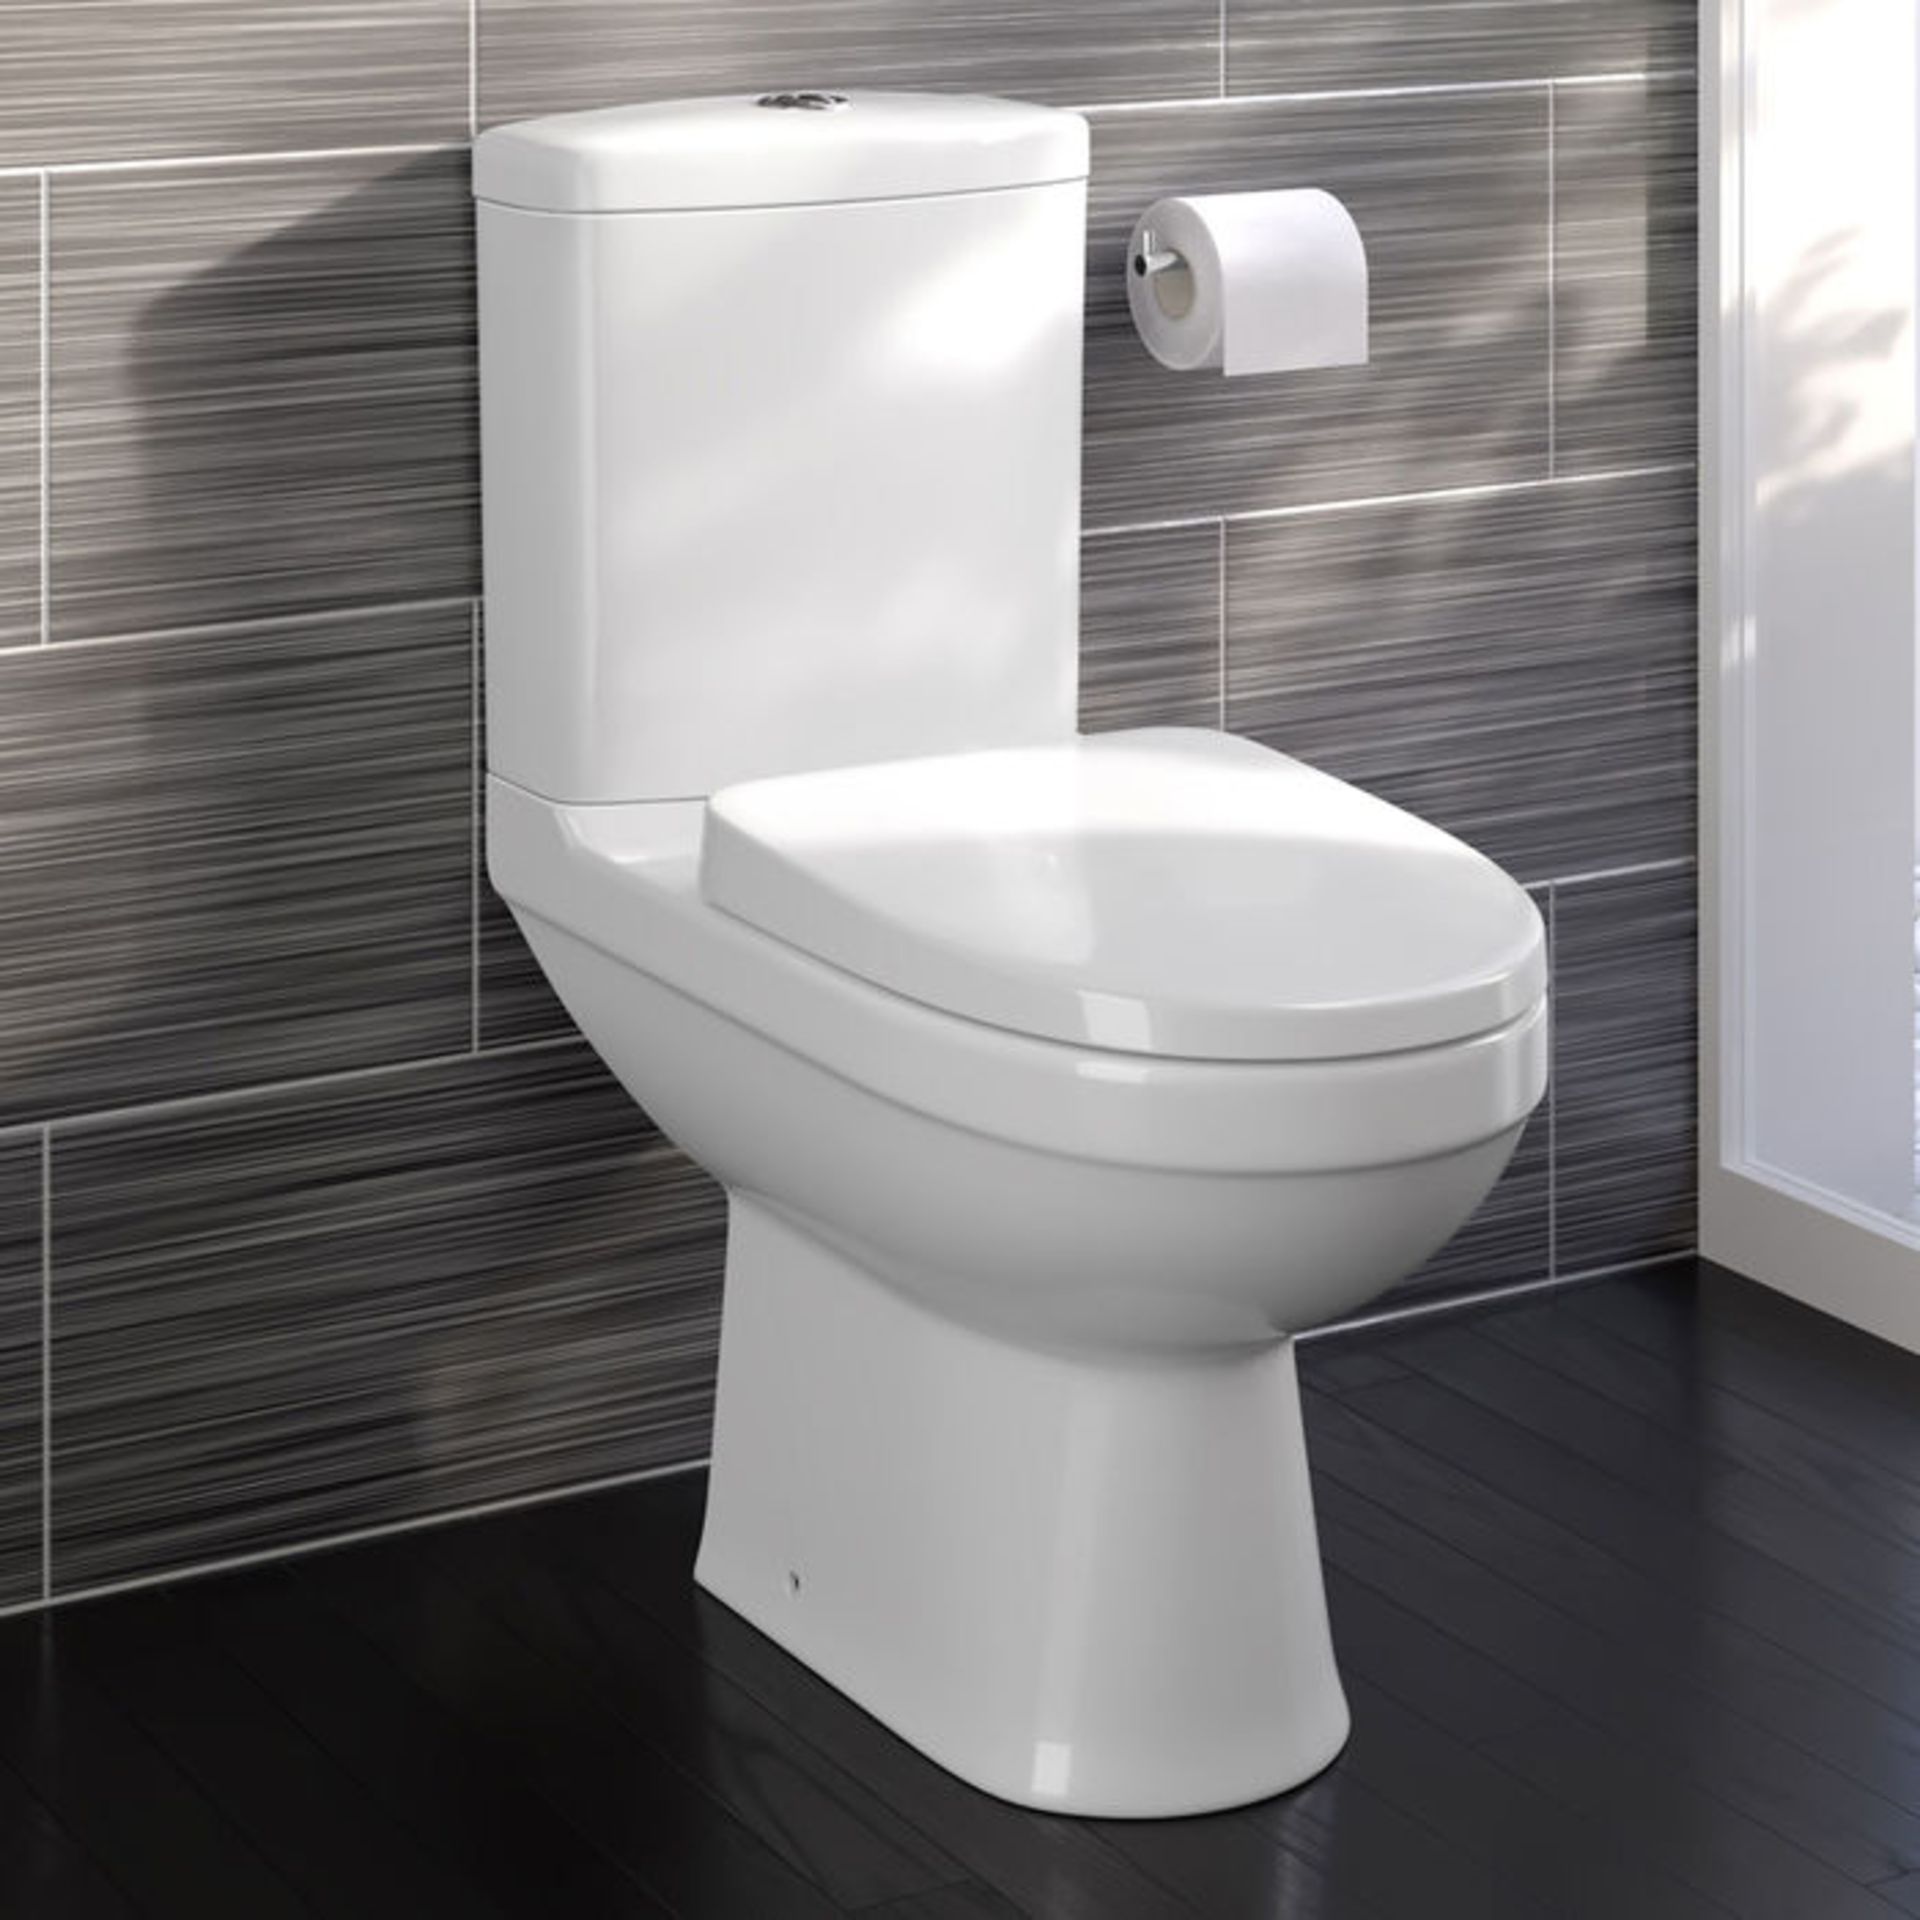 (S151) Sabrosa II Close Coupled Toilet & Cistern inc Soft Close Seat Made from White Vitreous